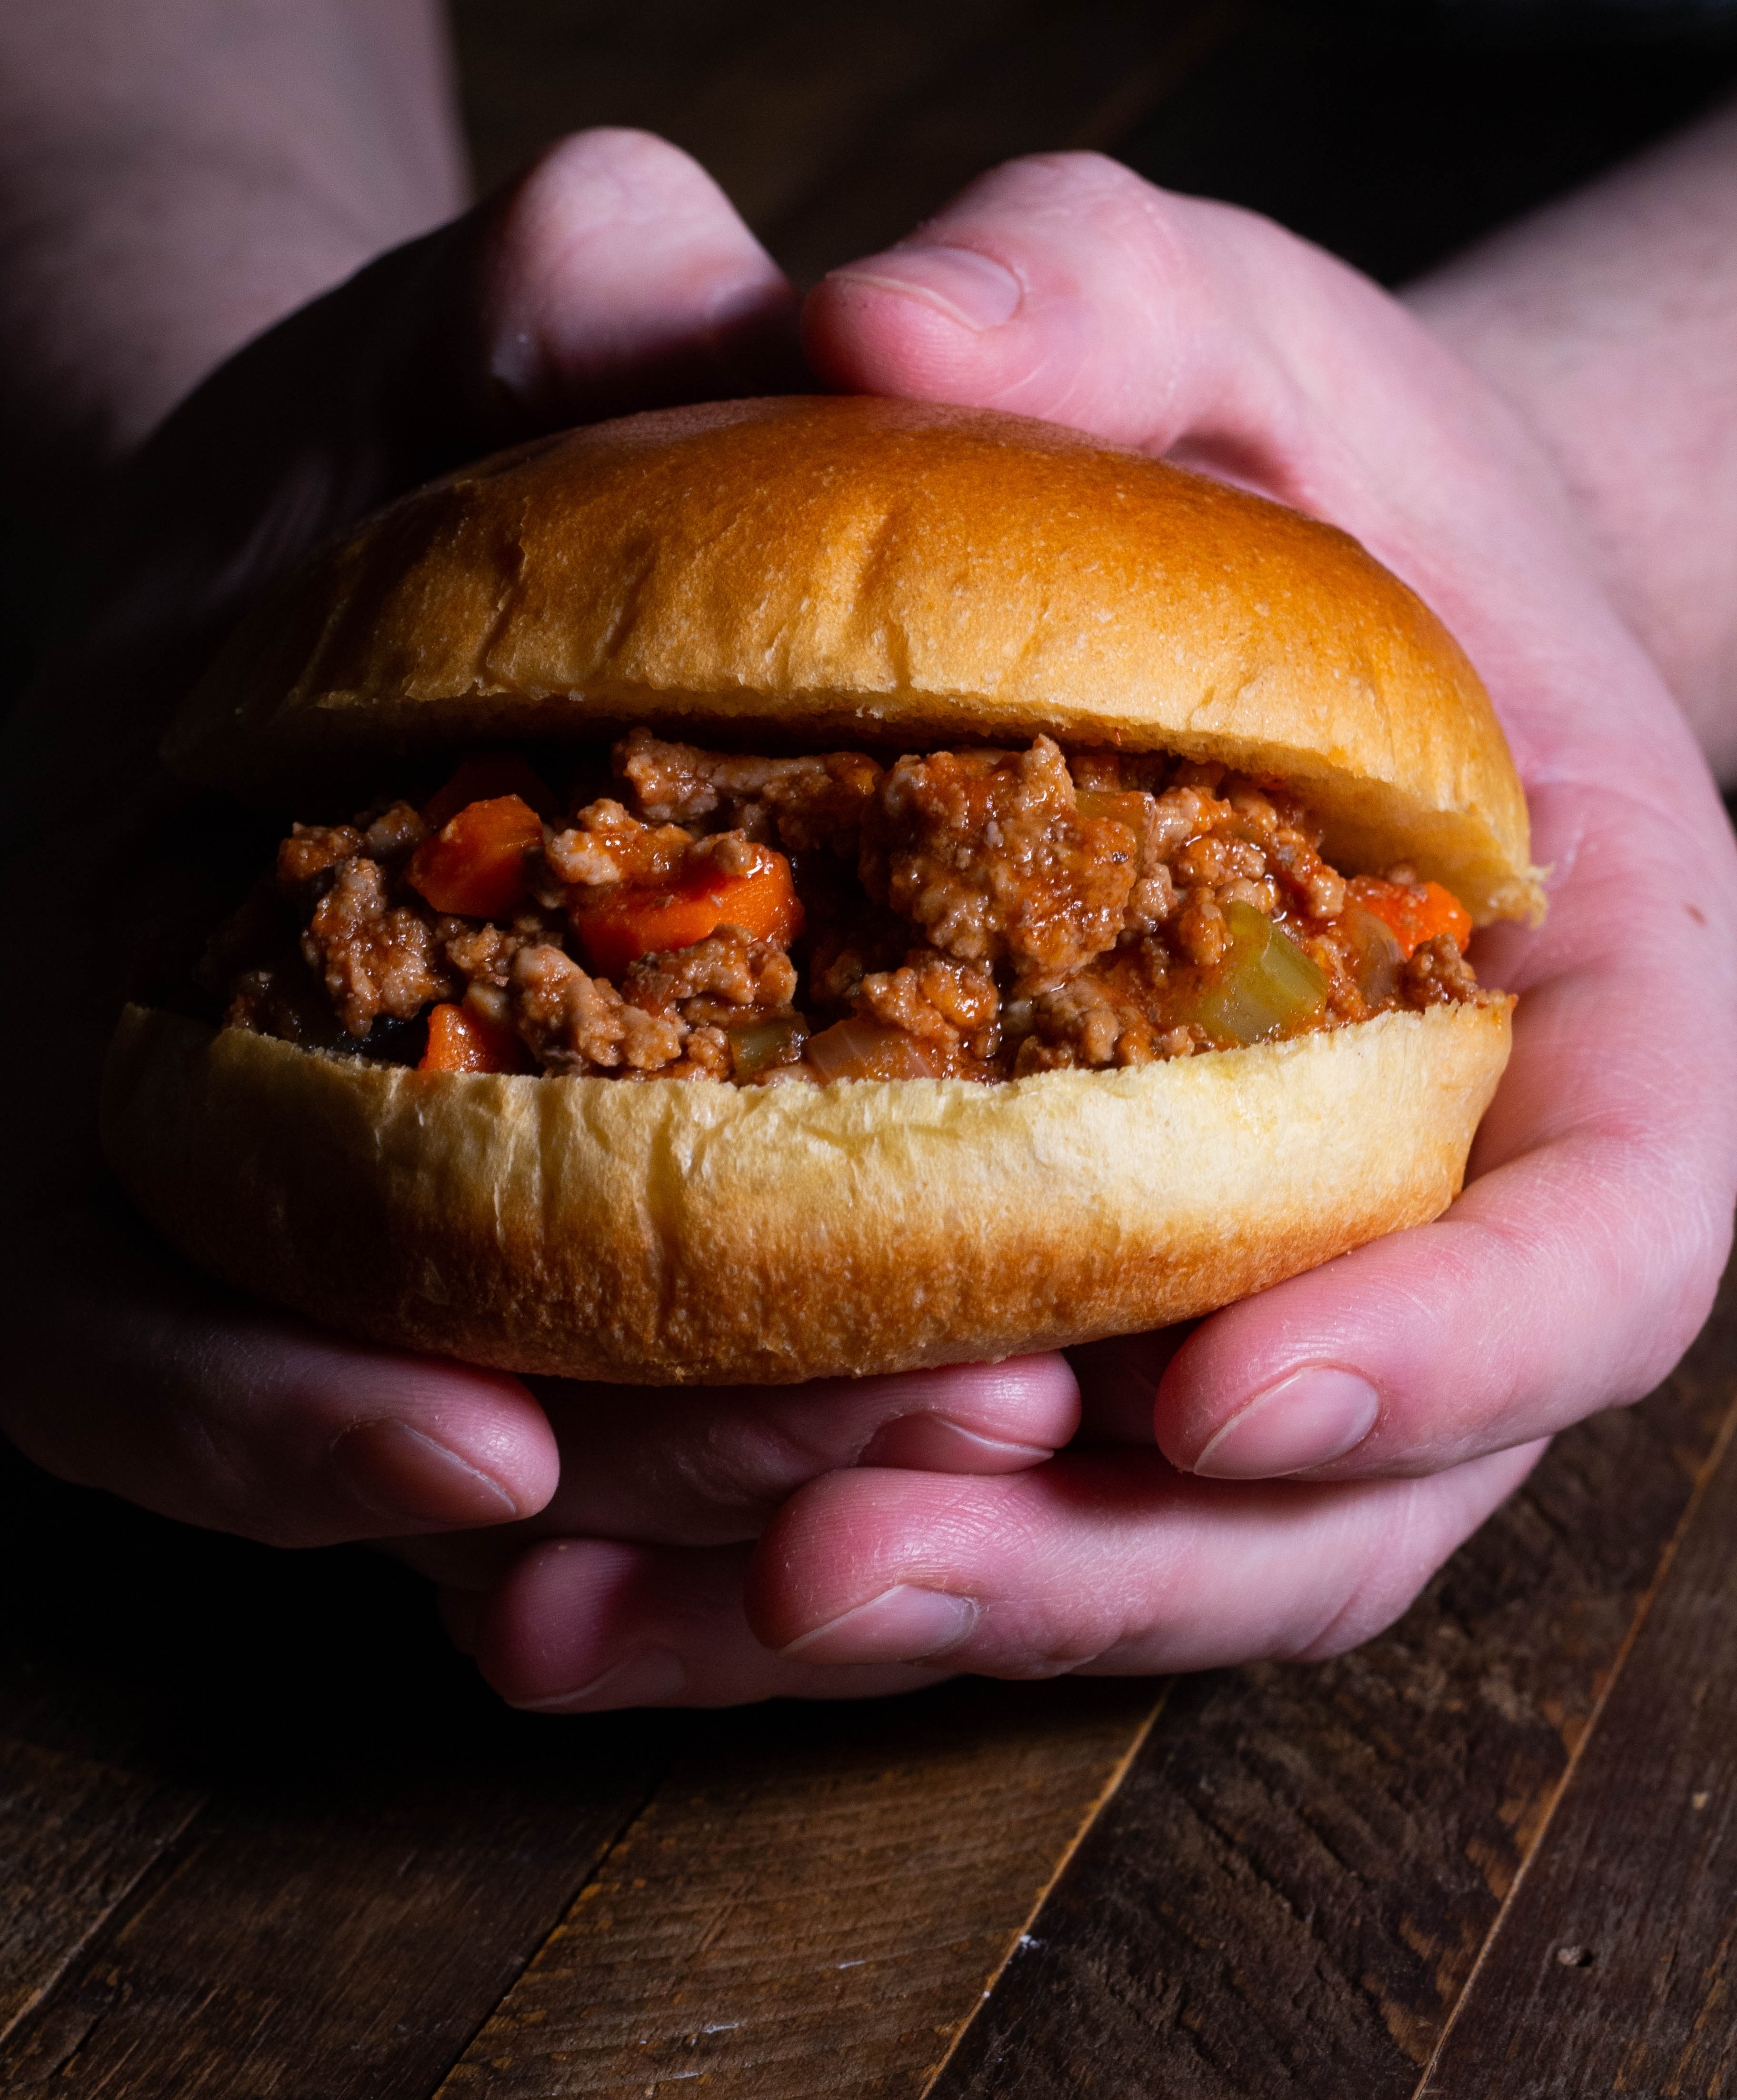 Pair of hands holding a brioche bun with bolognese.